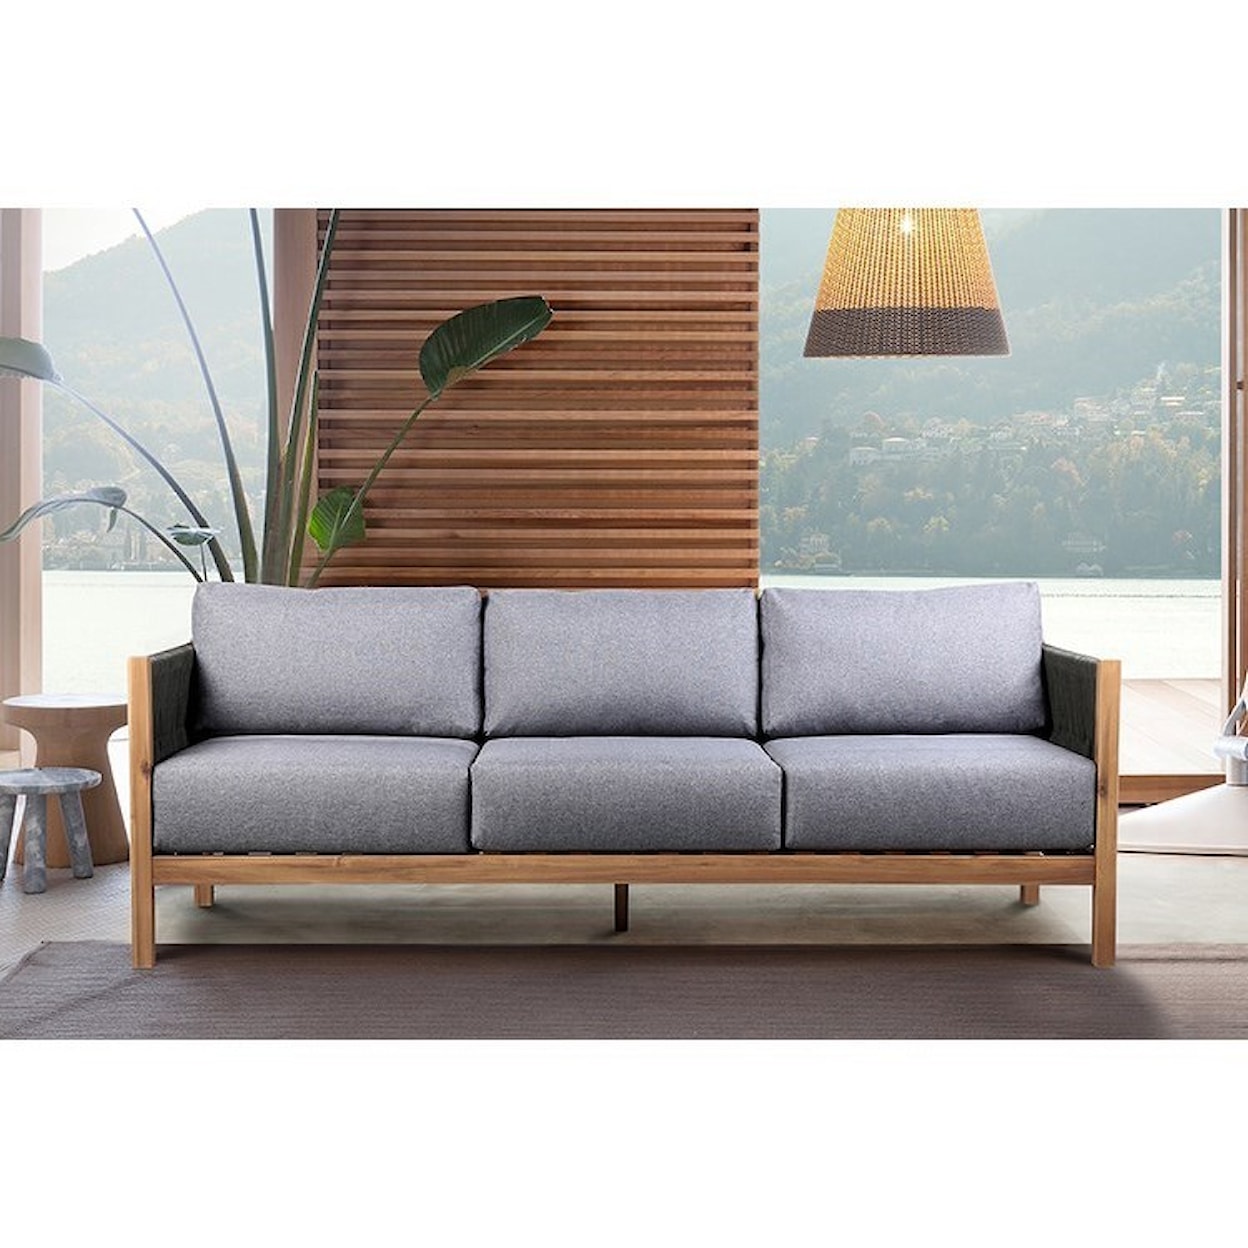 Armen Living Sienna Outdoor Patio Sofa in Acacia Wood wit